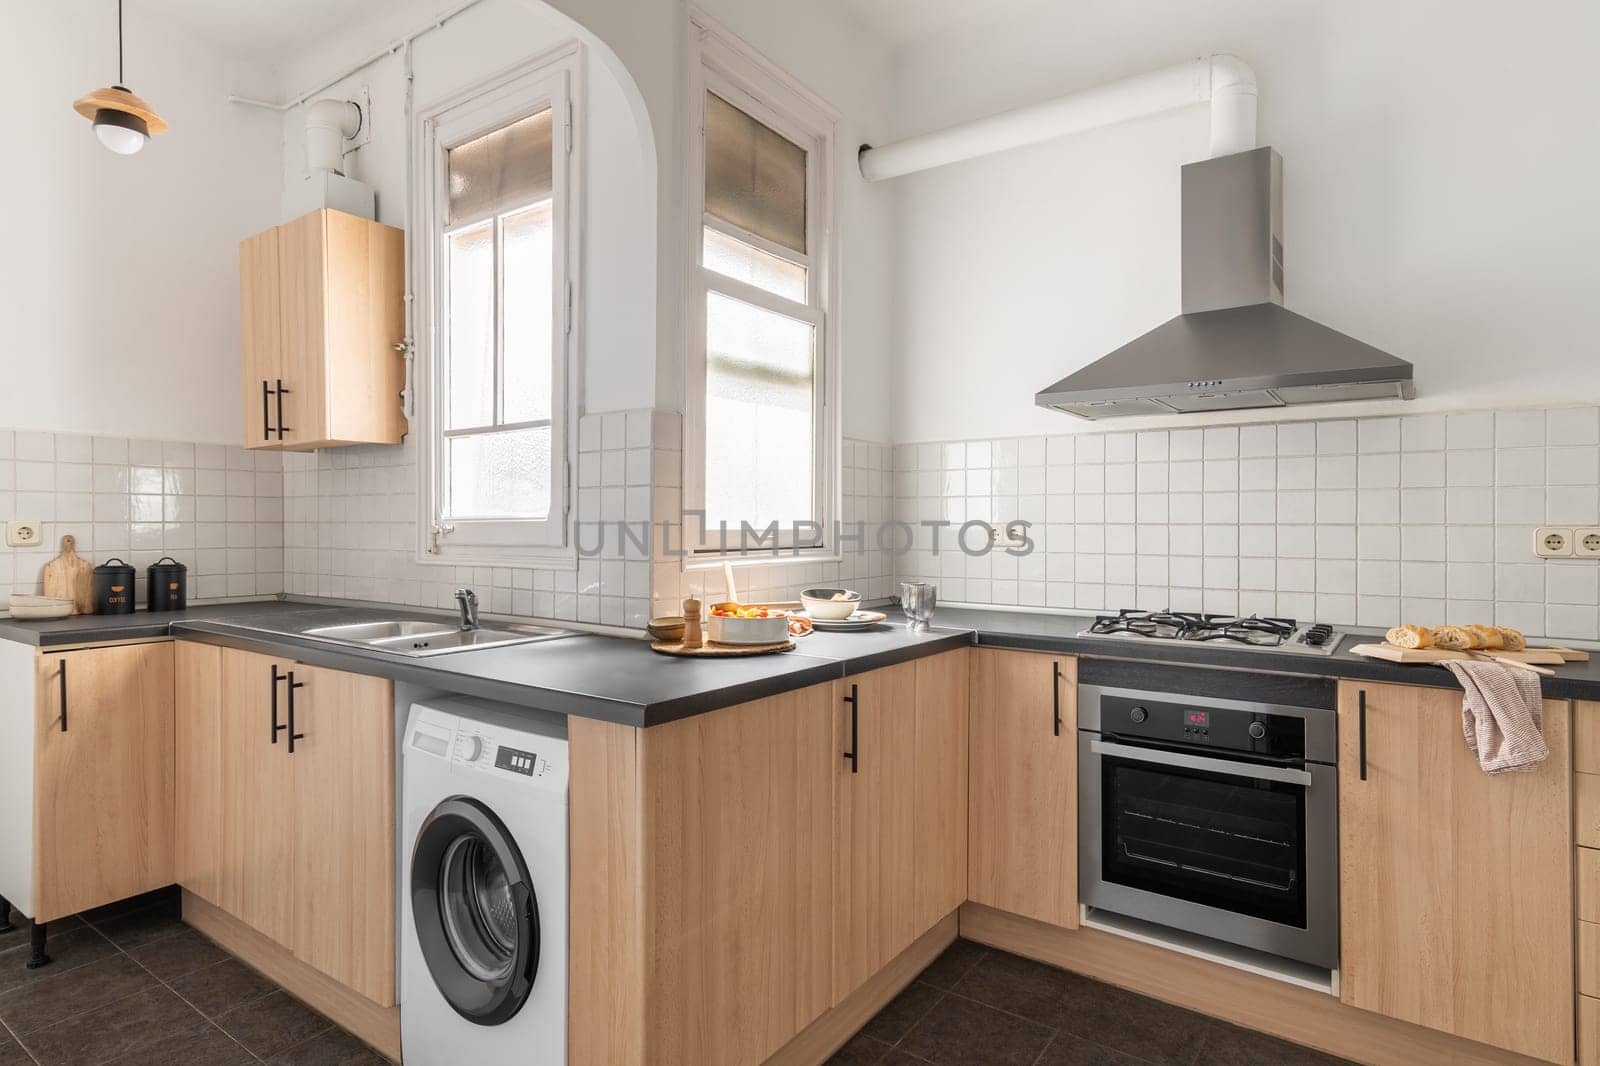 Stylish kitchen with built-in appliances oven and washing machine with extractor hood and white tiles in a modern apartment. Concept of a five-star hotel and spacious kitchen.